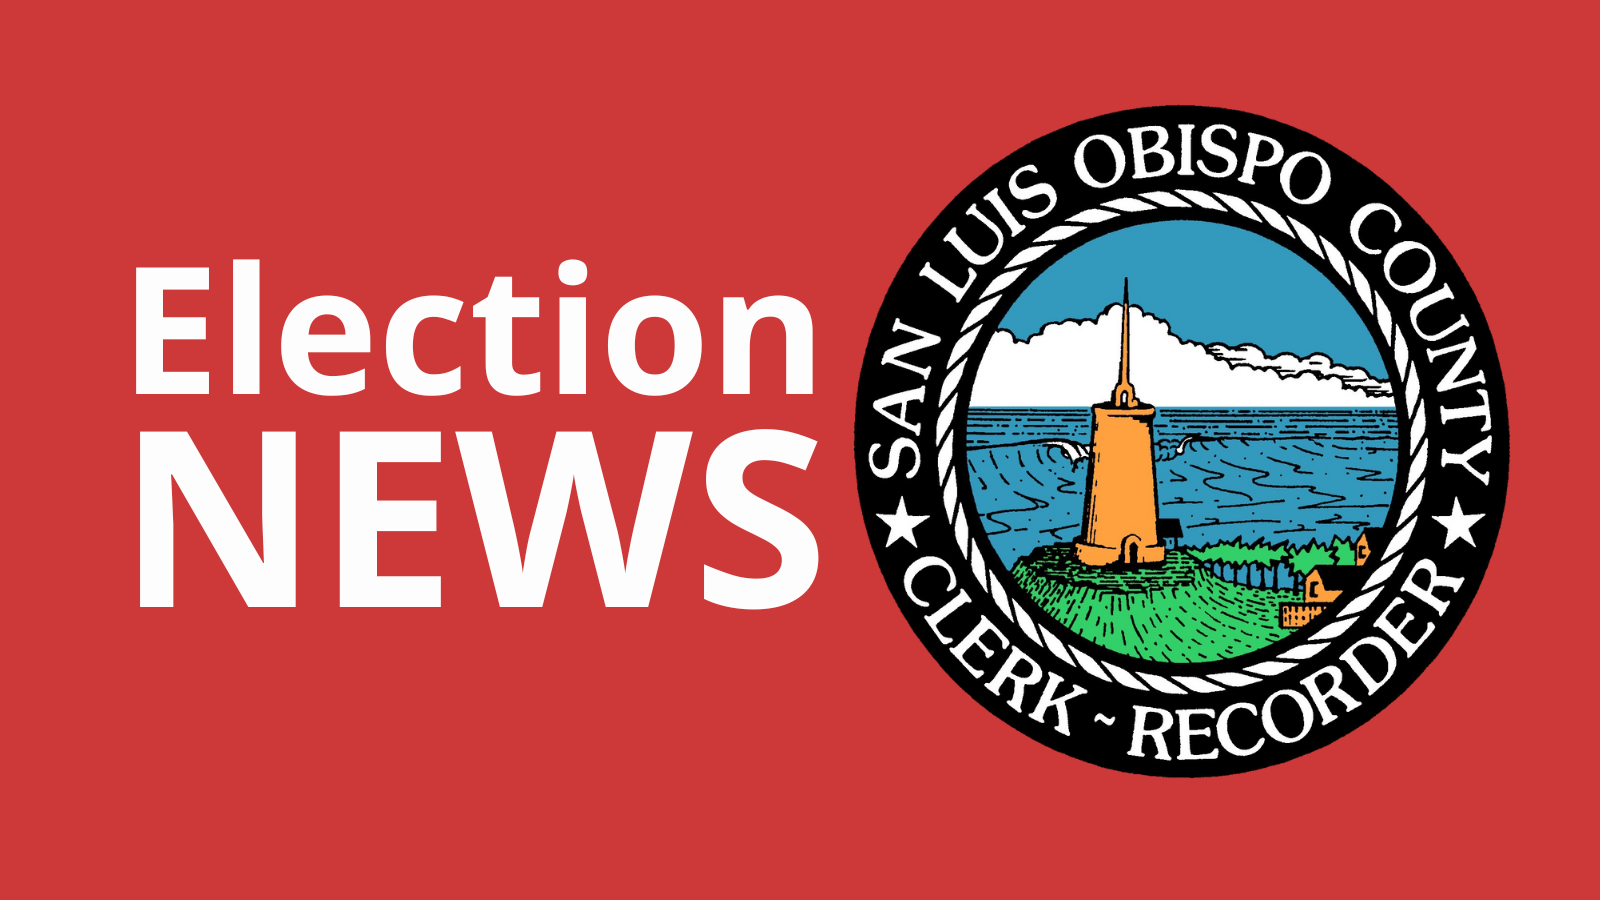 Image includes the official Clerk-Recorder seal next to the words Election News